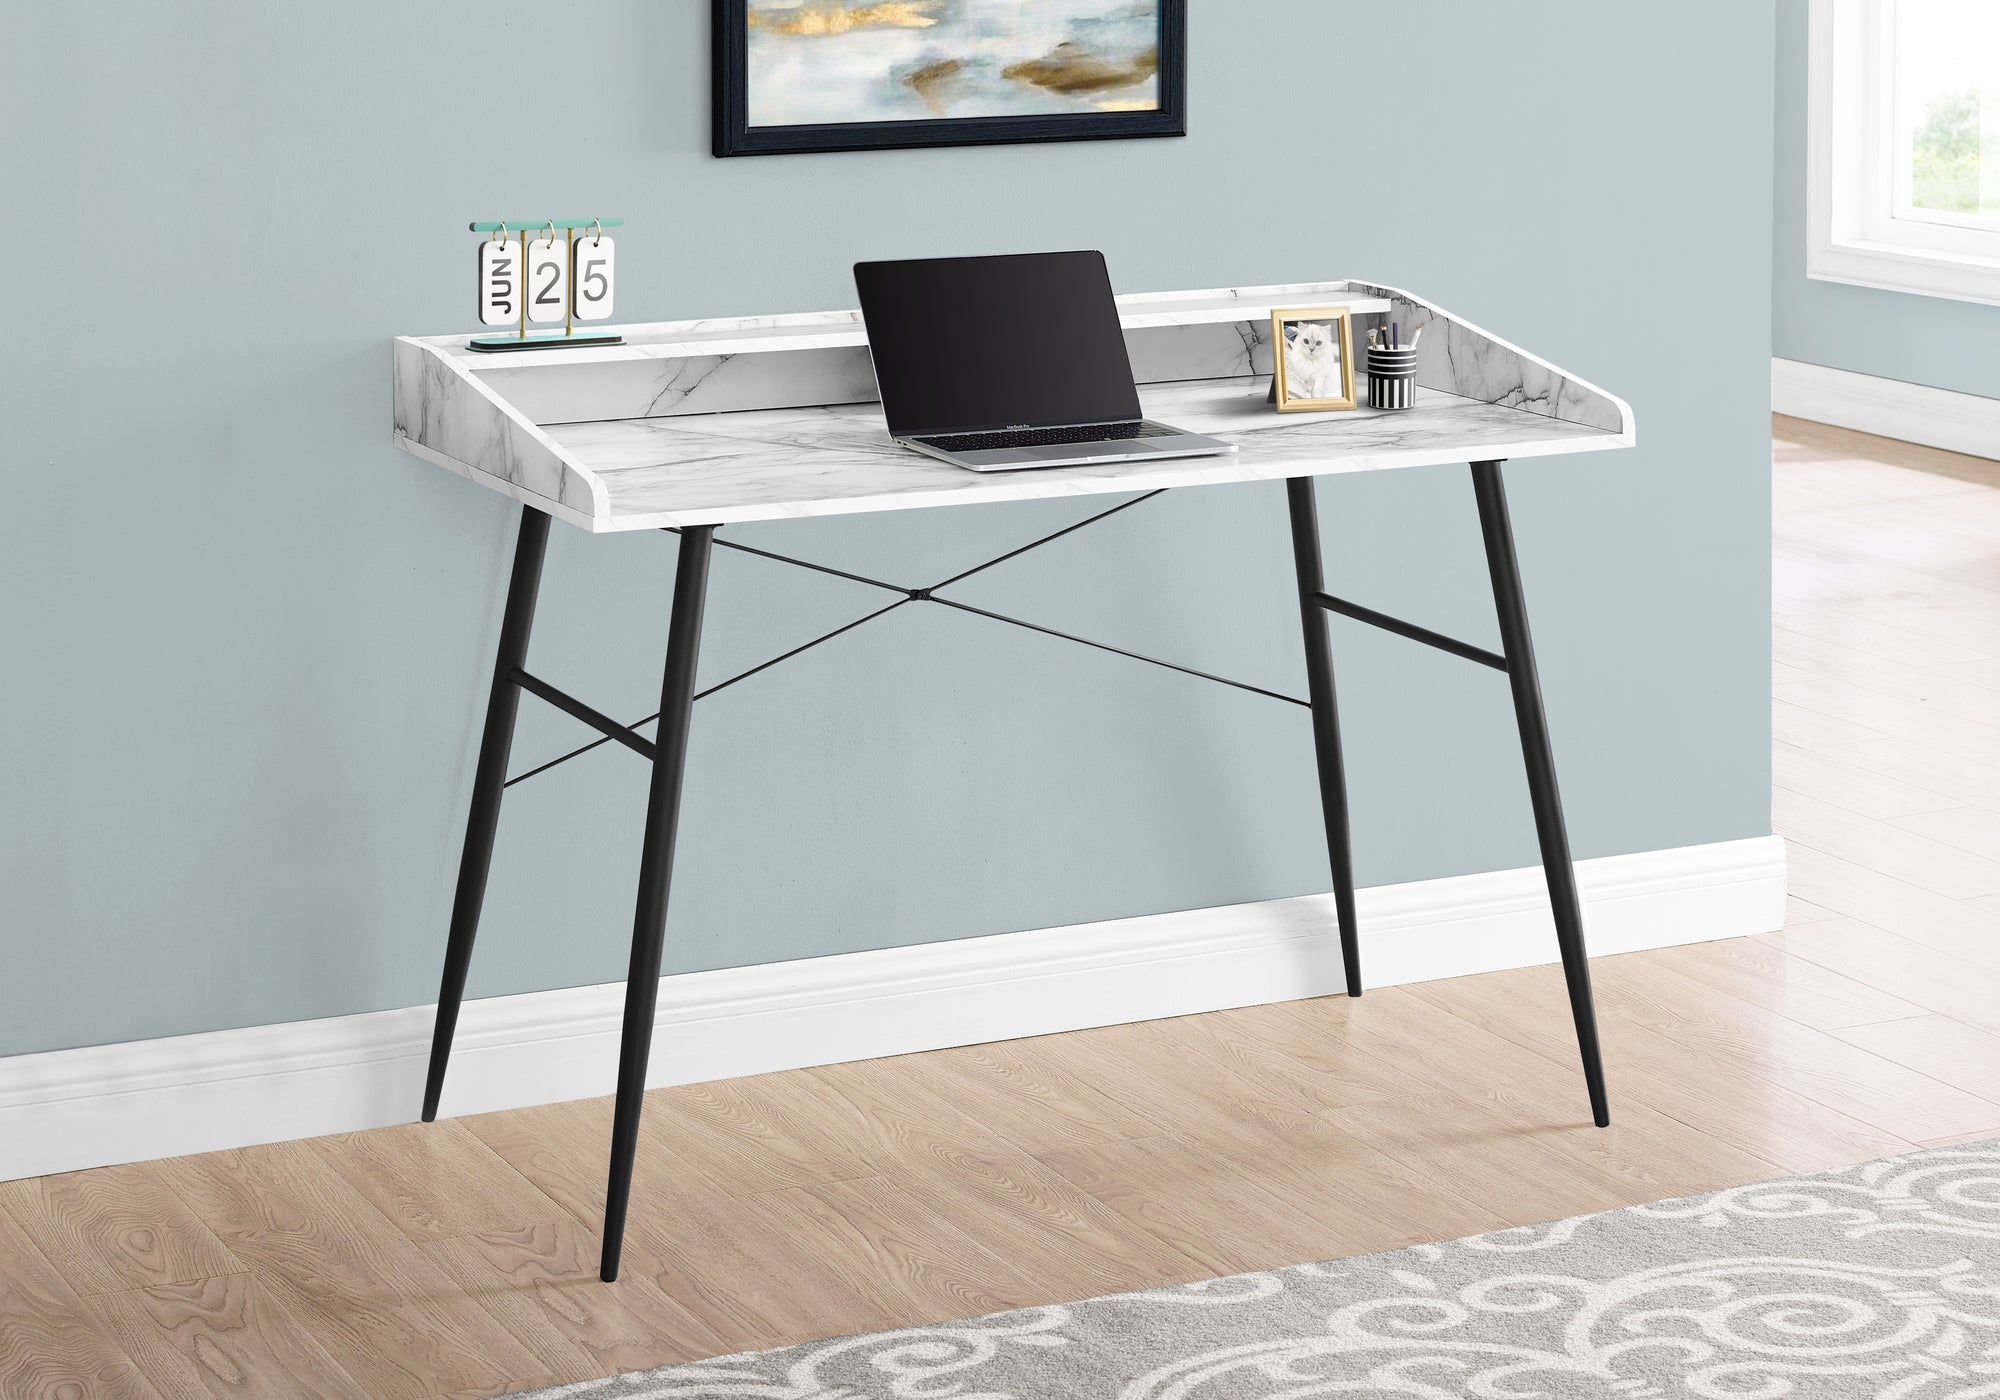 I 7539 - COMPUTER DESK - 48"L / WHITE MARBLE-LOOK / BLACK METAL BY MONARCH SPECIALTIES INC